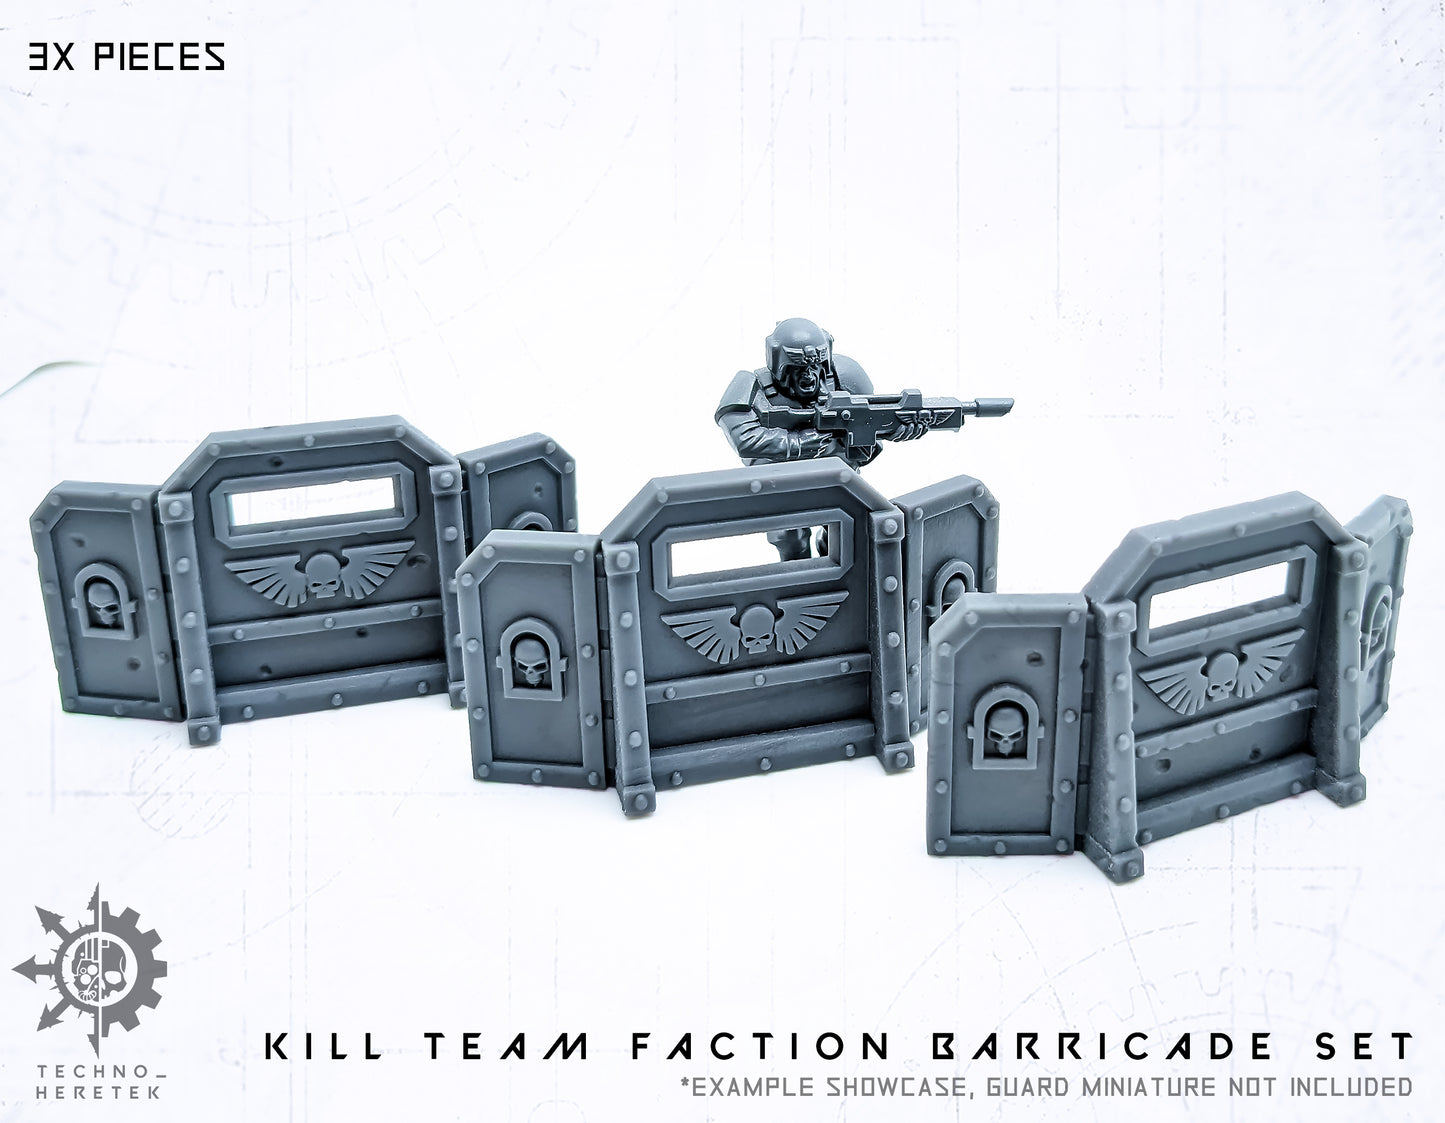 Imperial Guard Faction Barricades